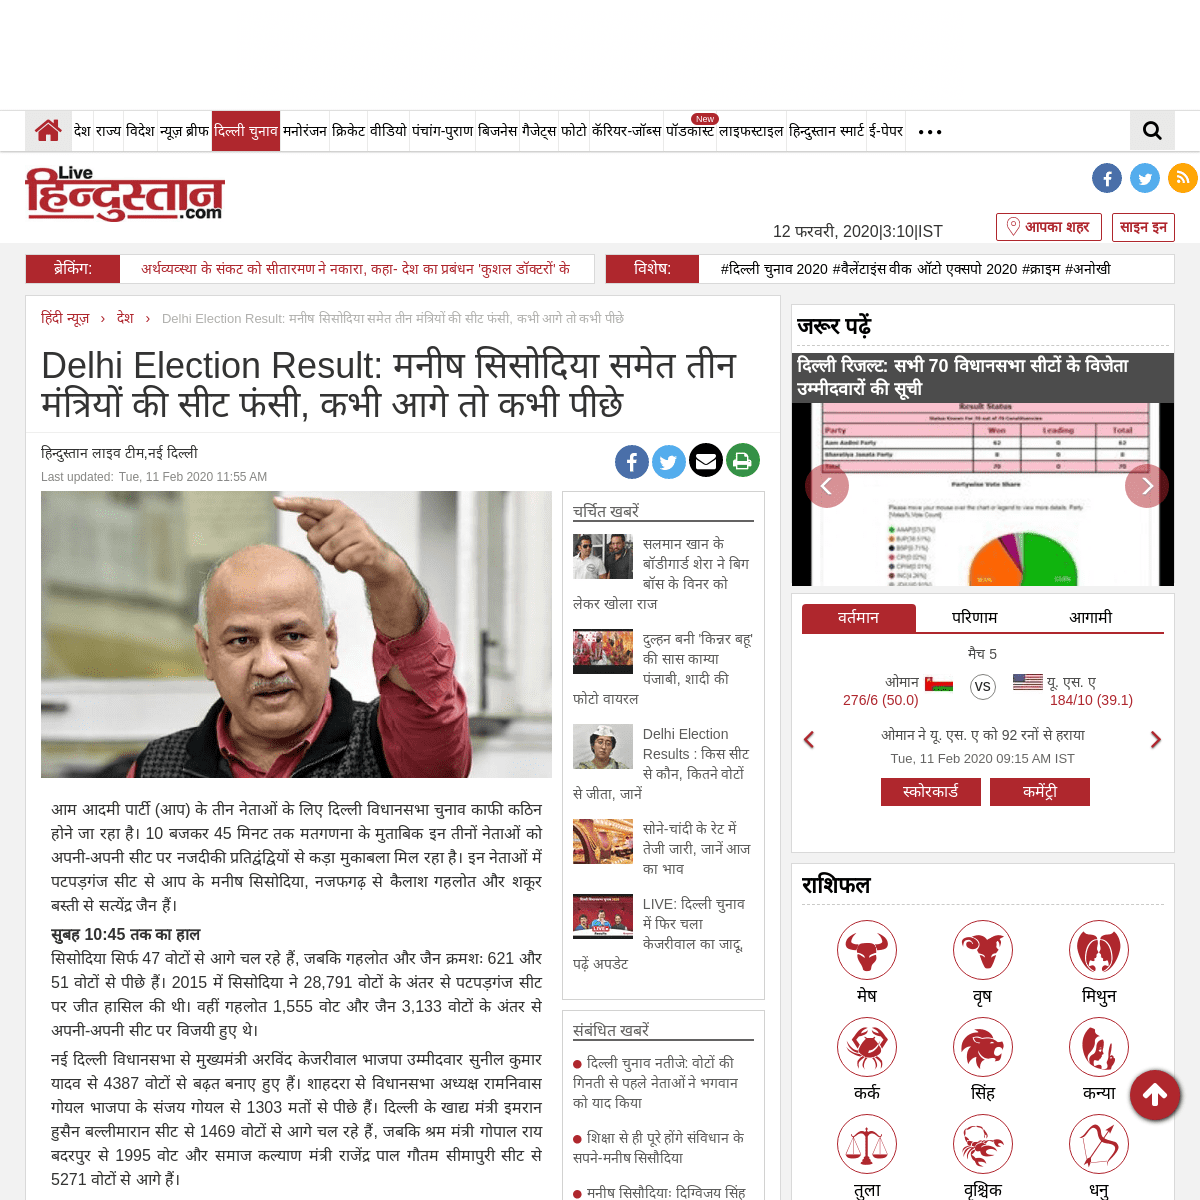 A complete backup of www.livehindustan.com/national/story-delhi-election-result-tight-contest-for-aap-manish-sisodia-kailash-gah